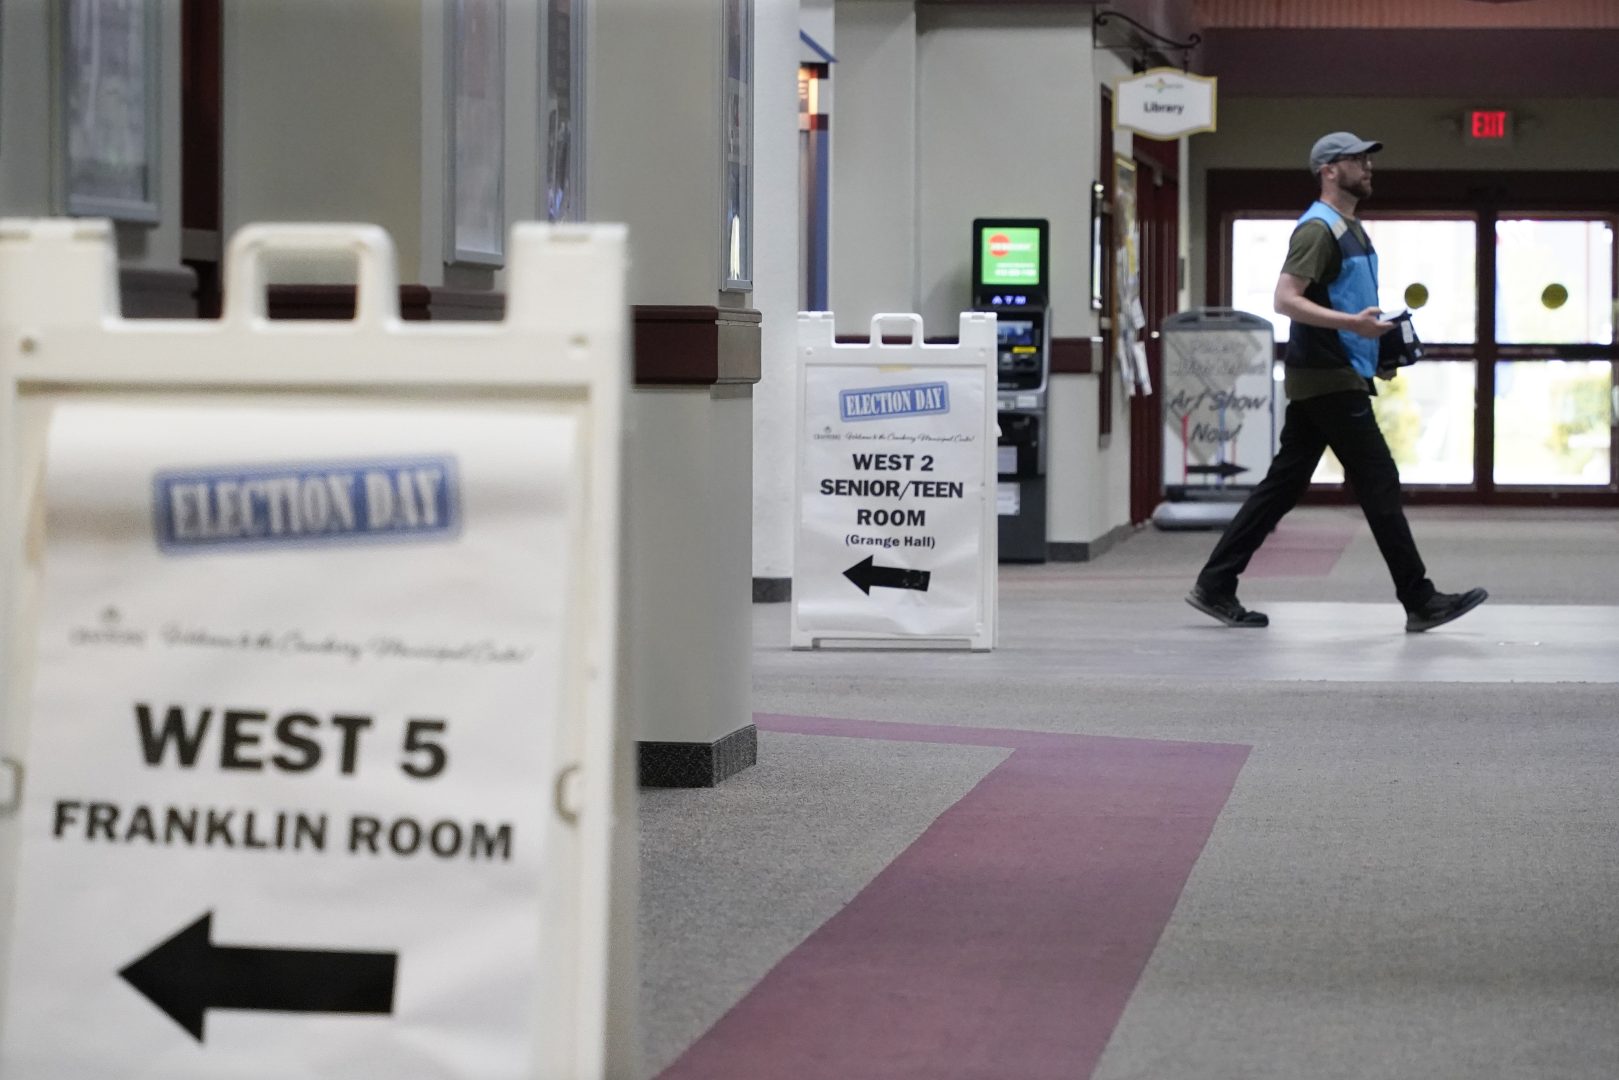 A visitor walks through the Cranberry Township Municipal Center where signs point to some of the rooms that will be used for voting in Tuesday's Pennsylvania Primary Election, Monday, May 16, 2022, in Cranberry Township, Butler County, Pa. 